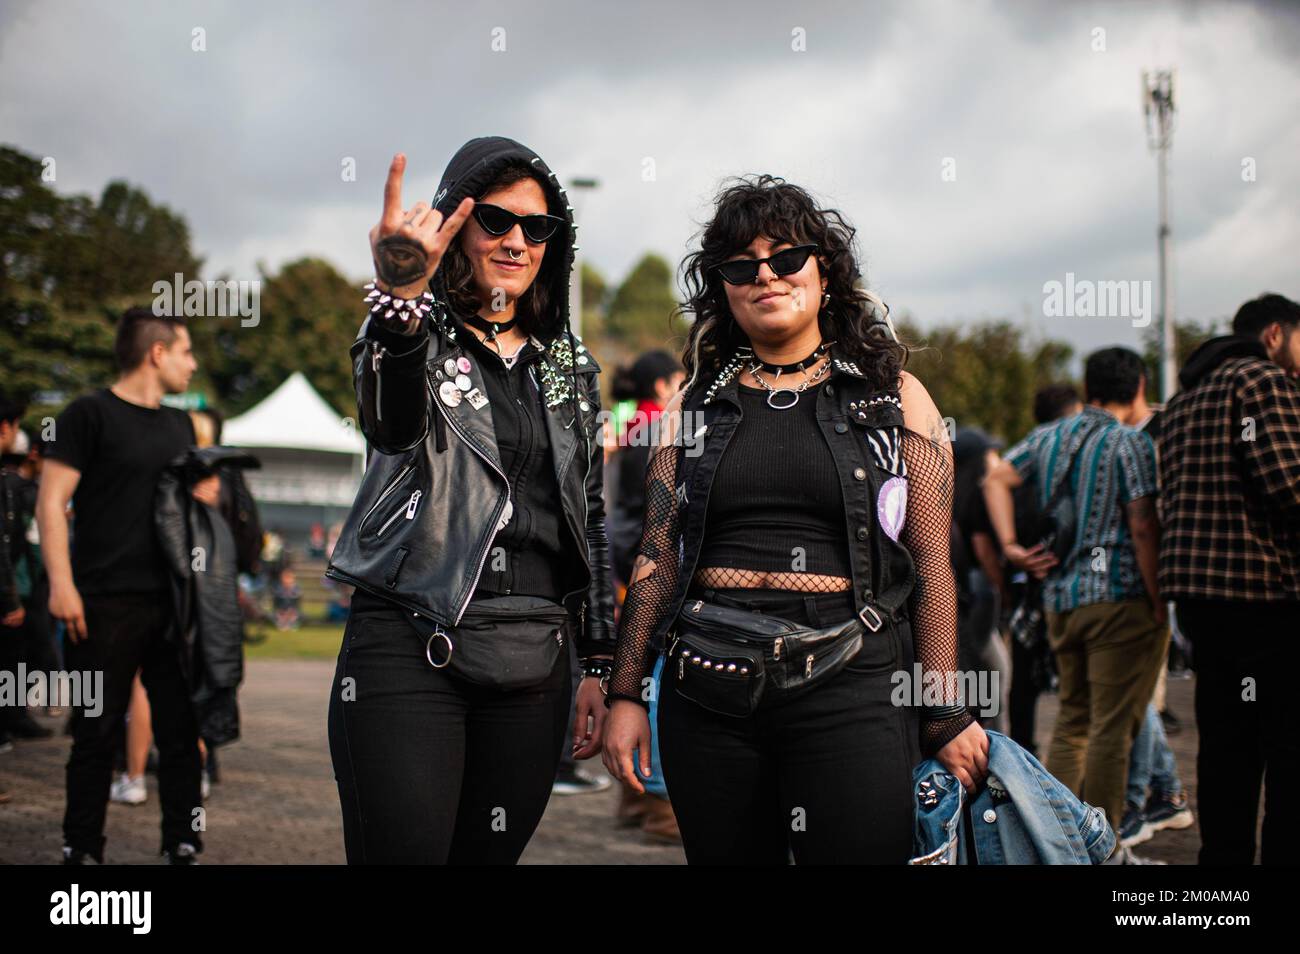 Concertgoers pose for a portrait during the third day of the comeback of 'Rock al Parque' music festival, the biggest rock festival in latin america a Stock Photo